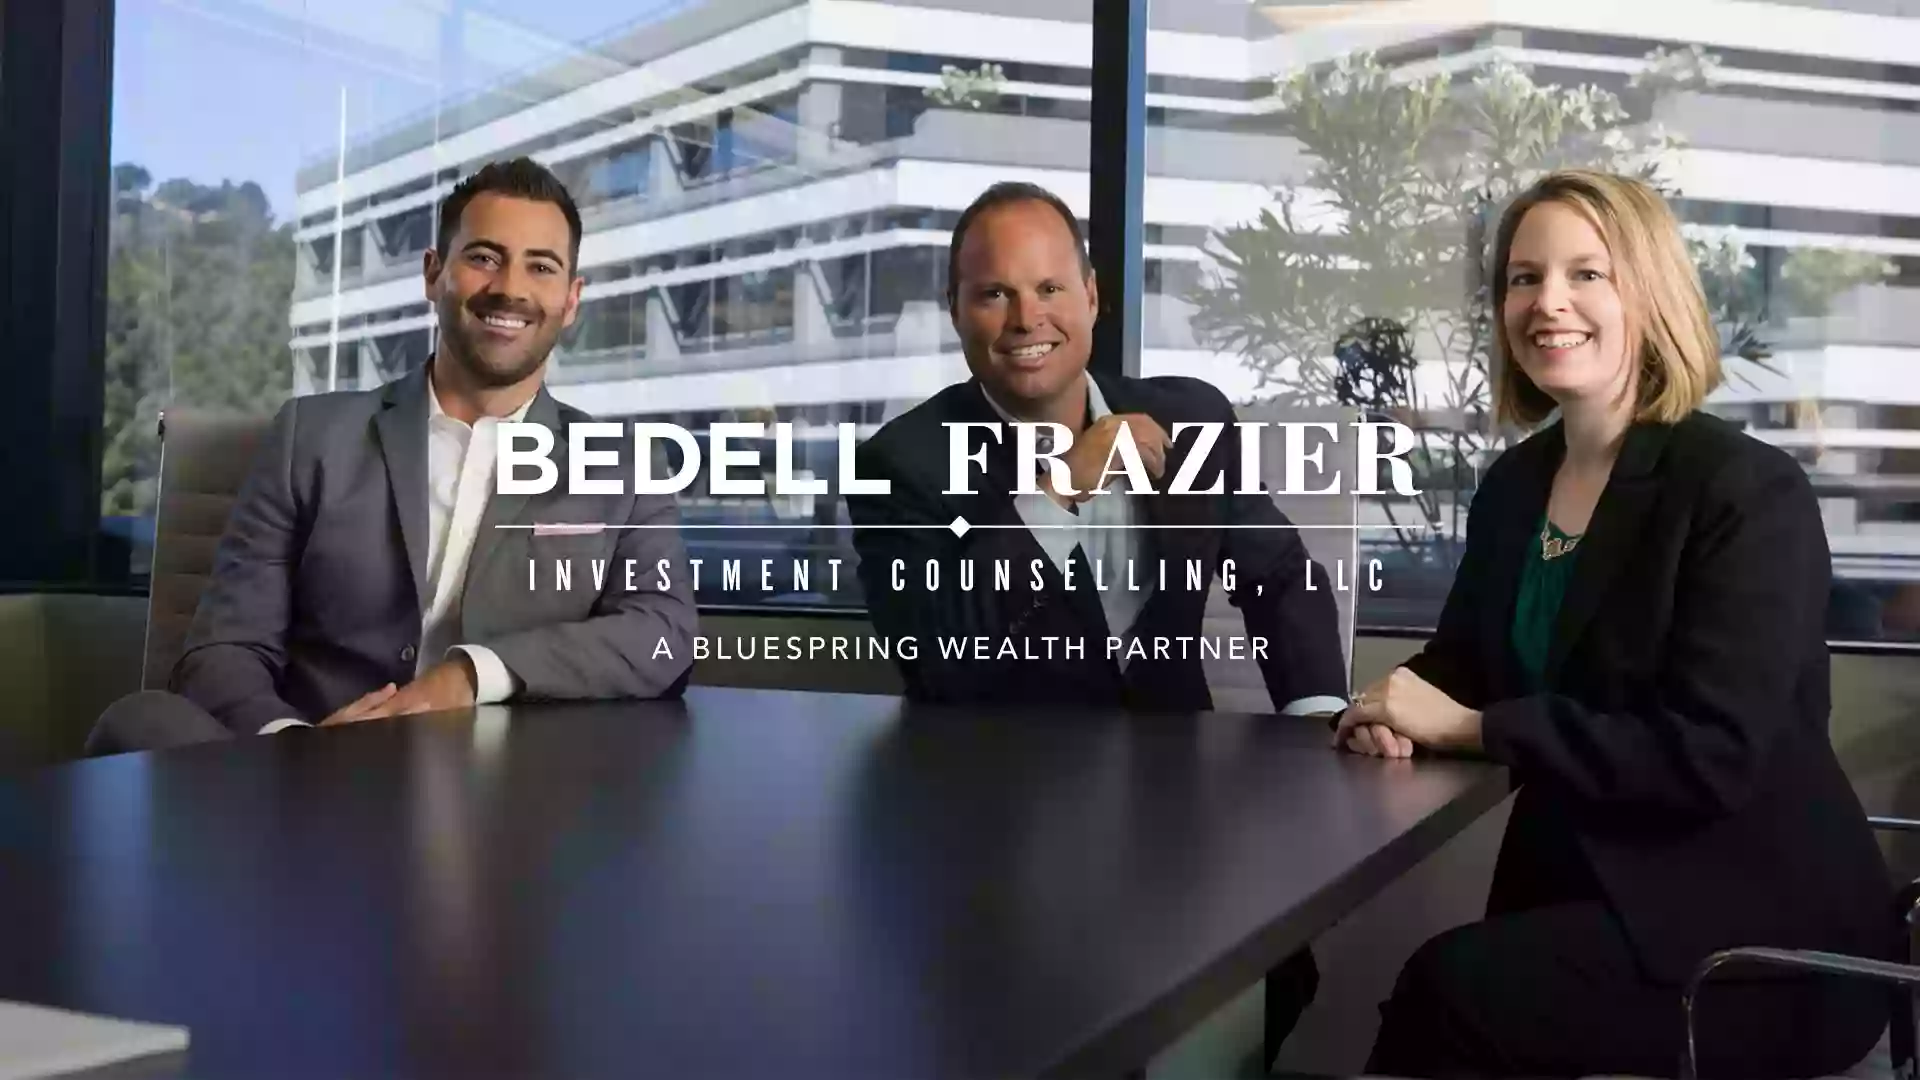 Bedell Frazier Investment Counselling, LLC